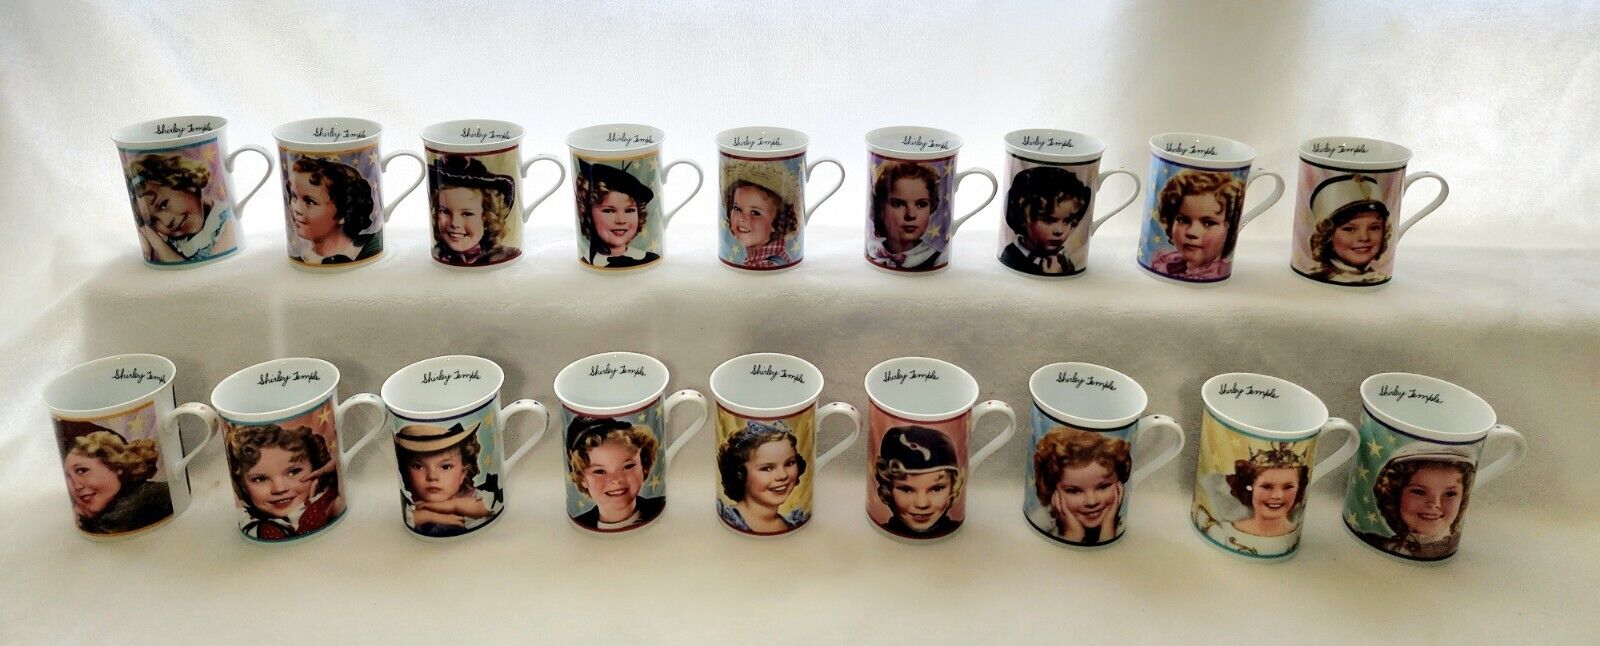 Shirley Temple The Danbury Mint Mug Collection Pre-Owned Complete Set of 18